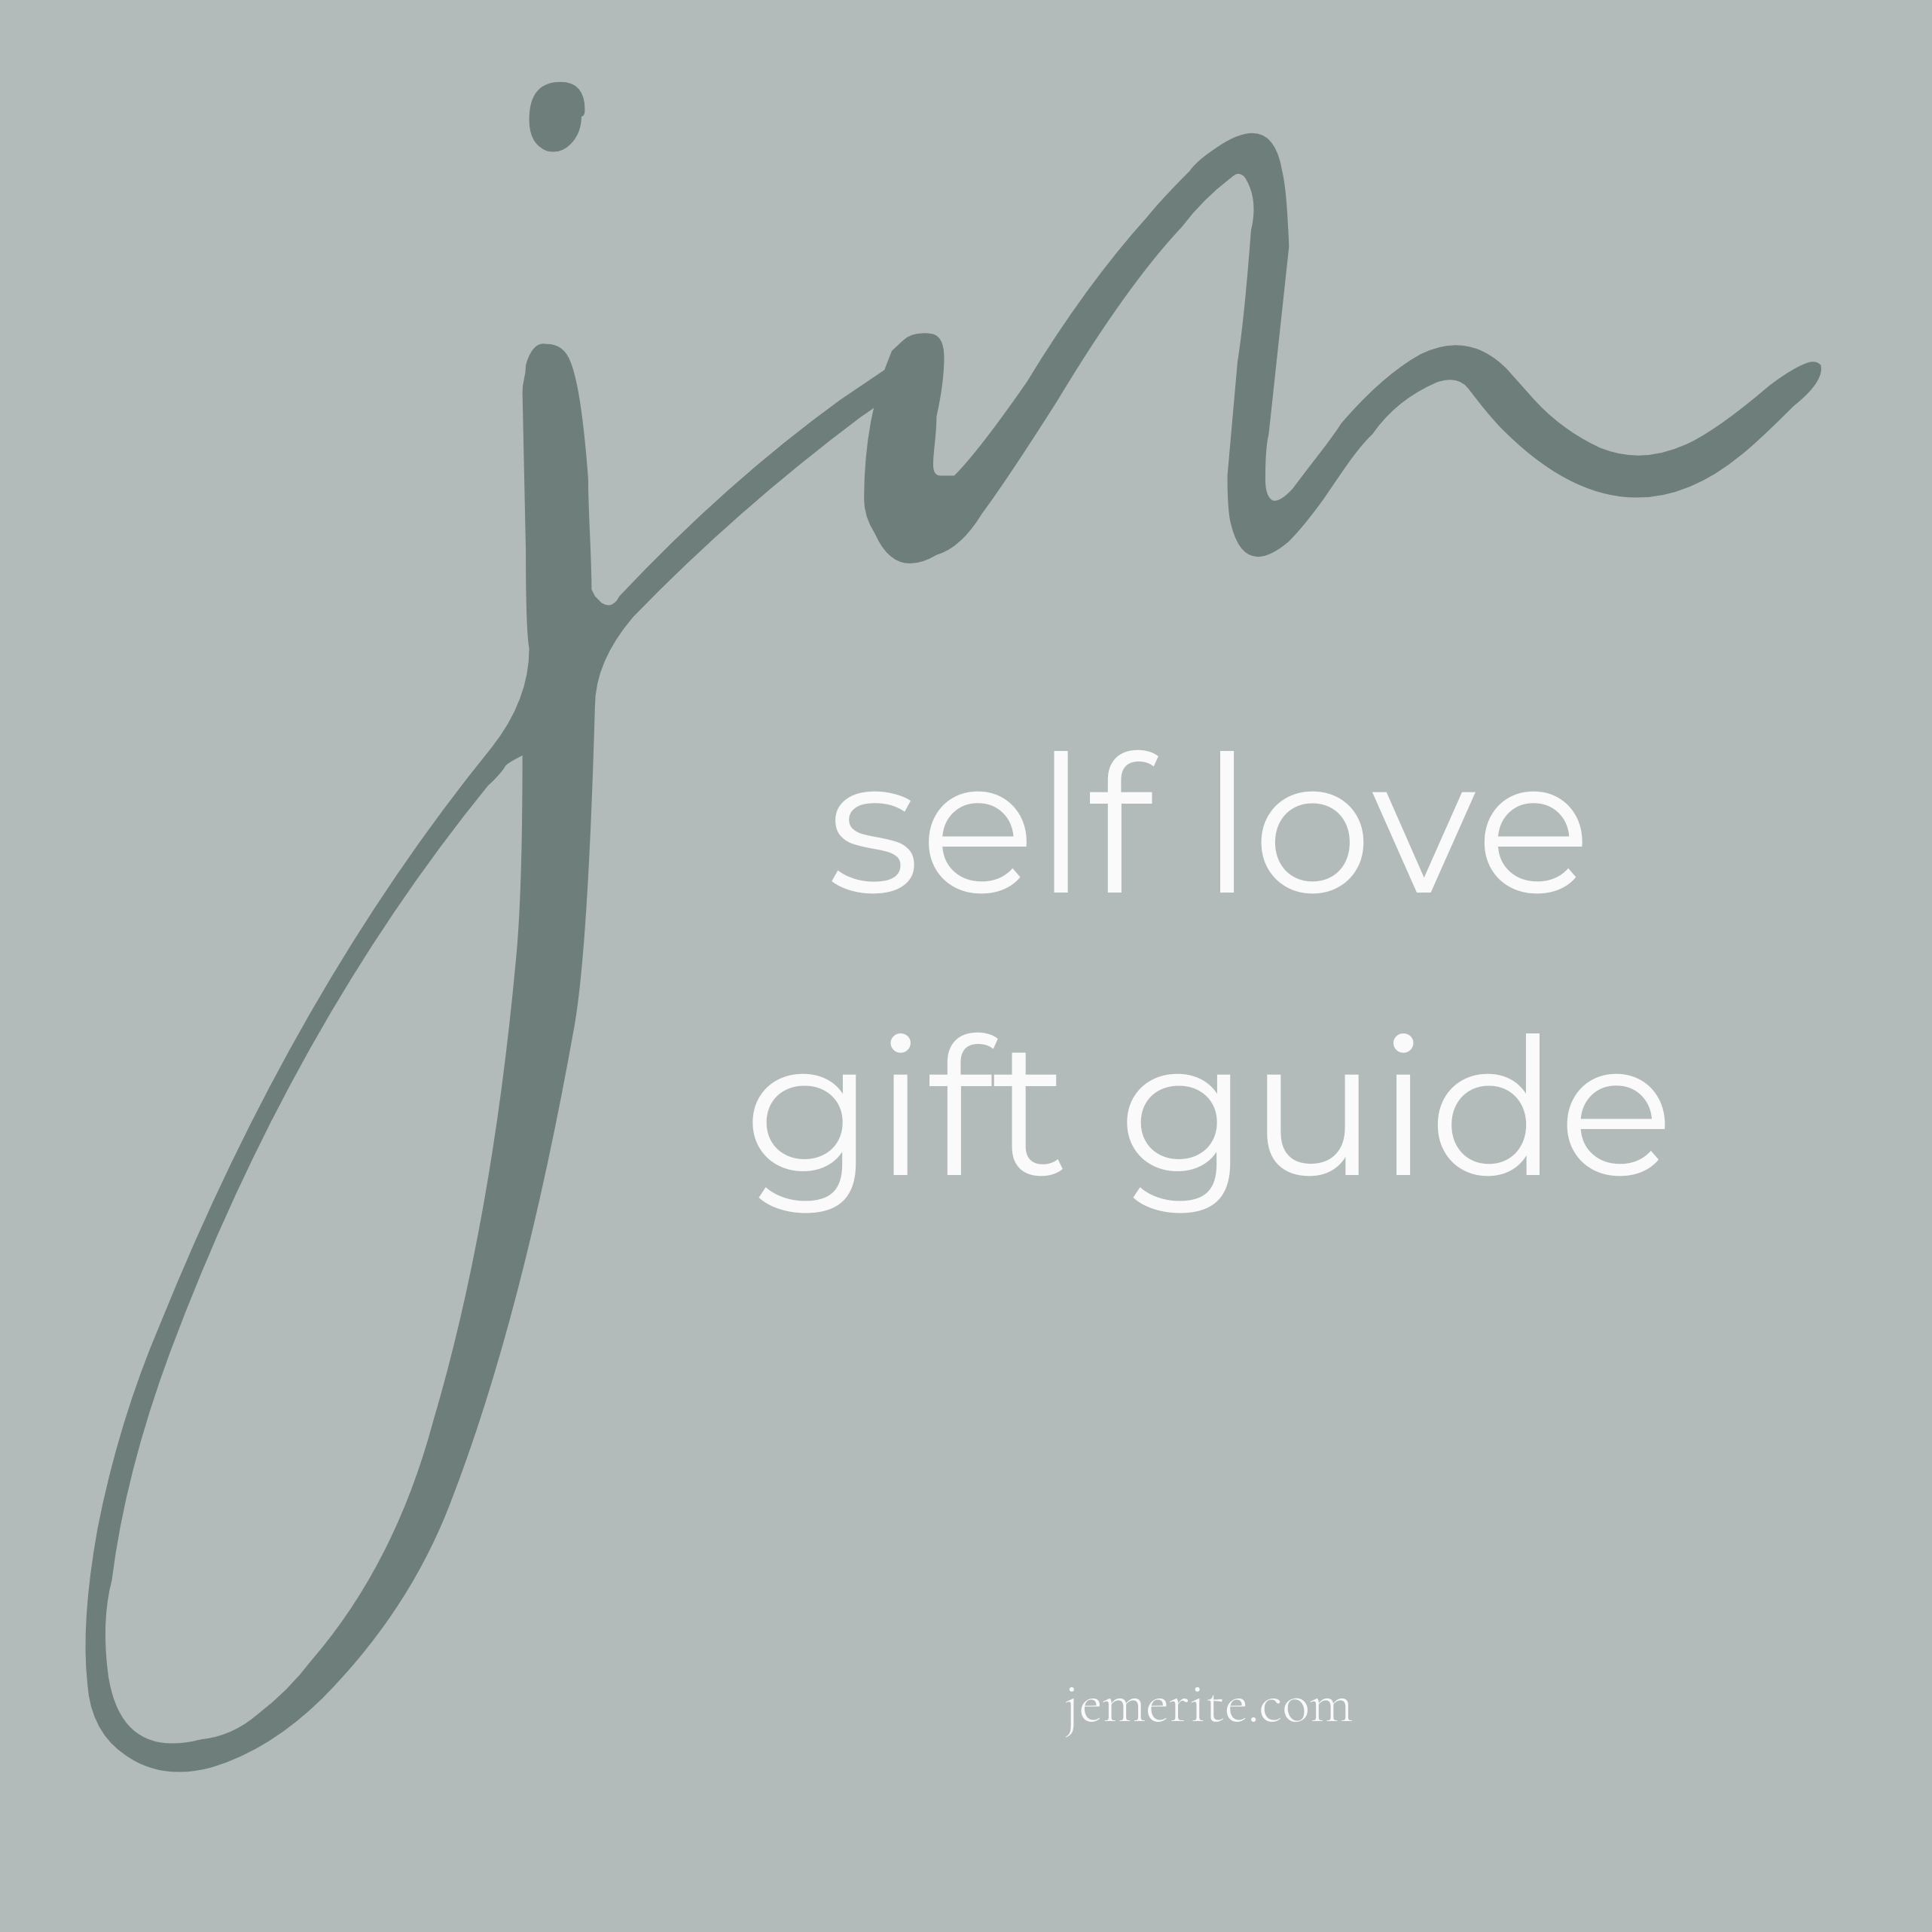 Hey You, The Self Love Gift Guide You've Been Waiting For, From Je Mérite